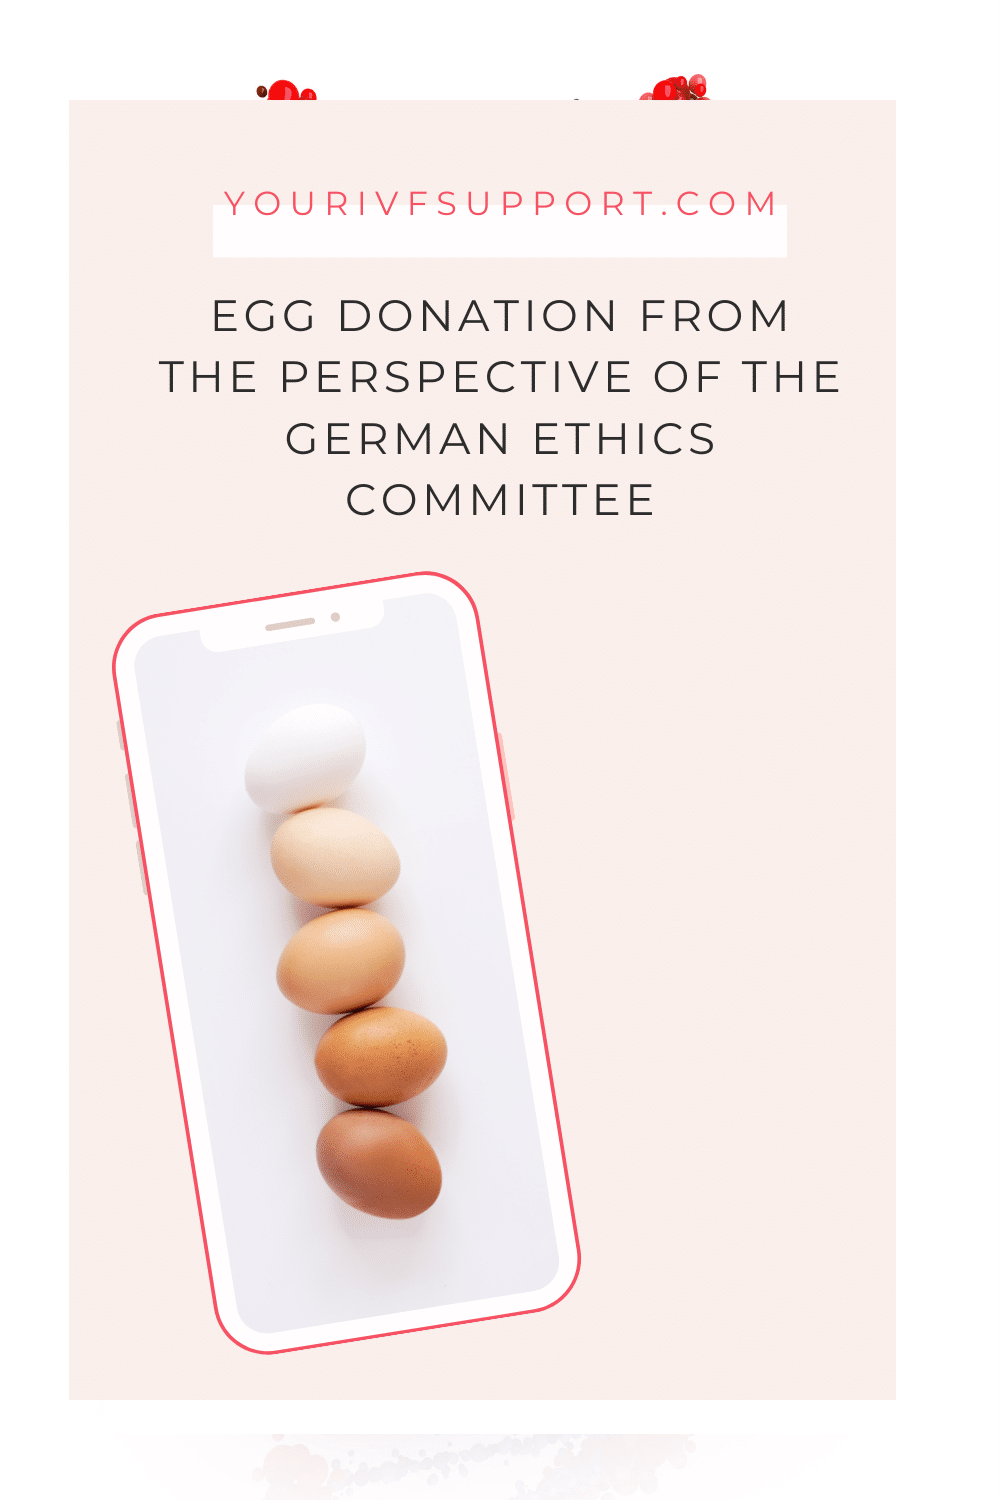 Egg Donation and German Ethics: Insights from the Committee